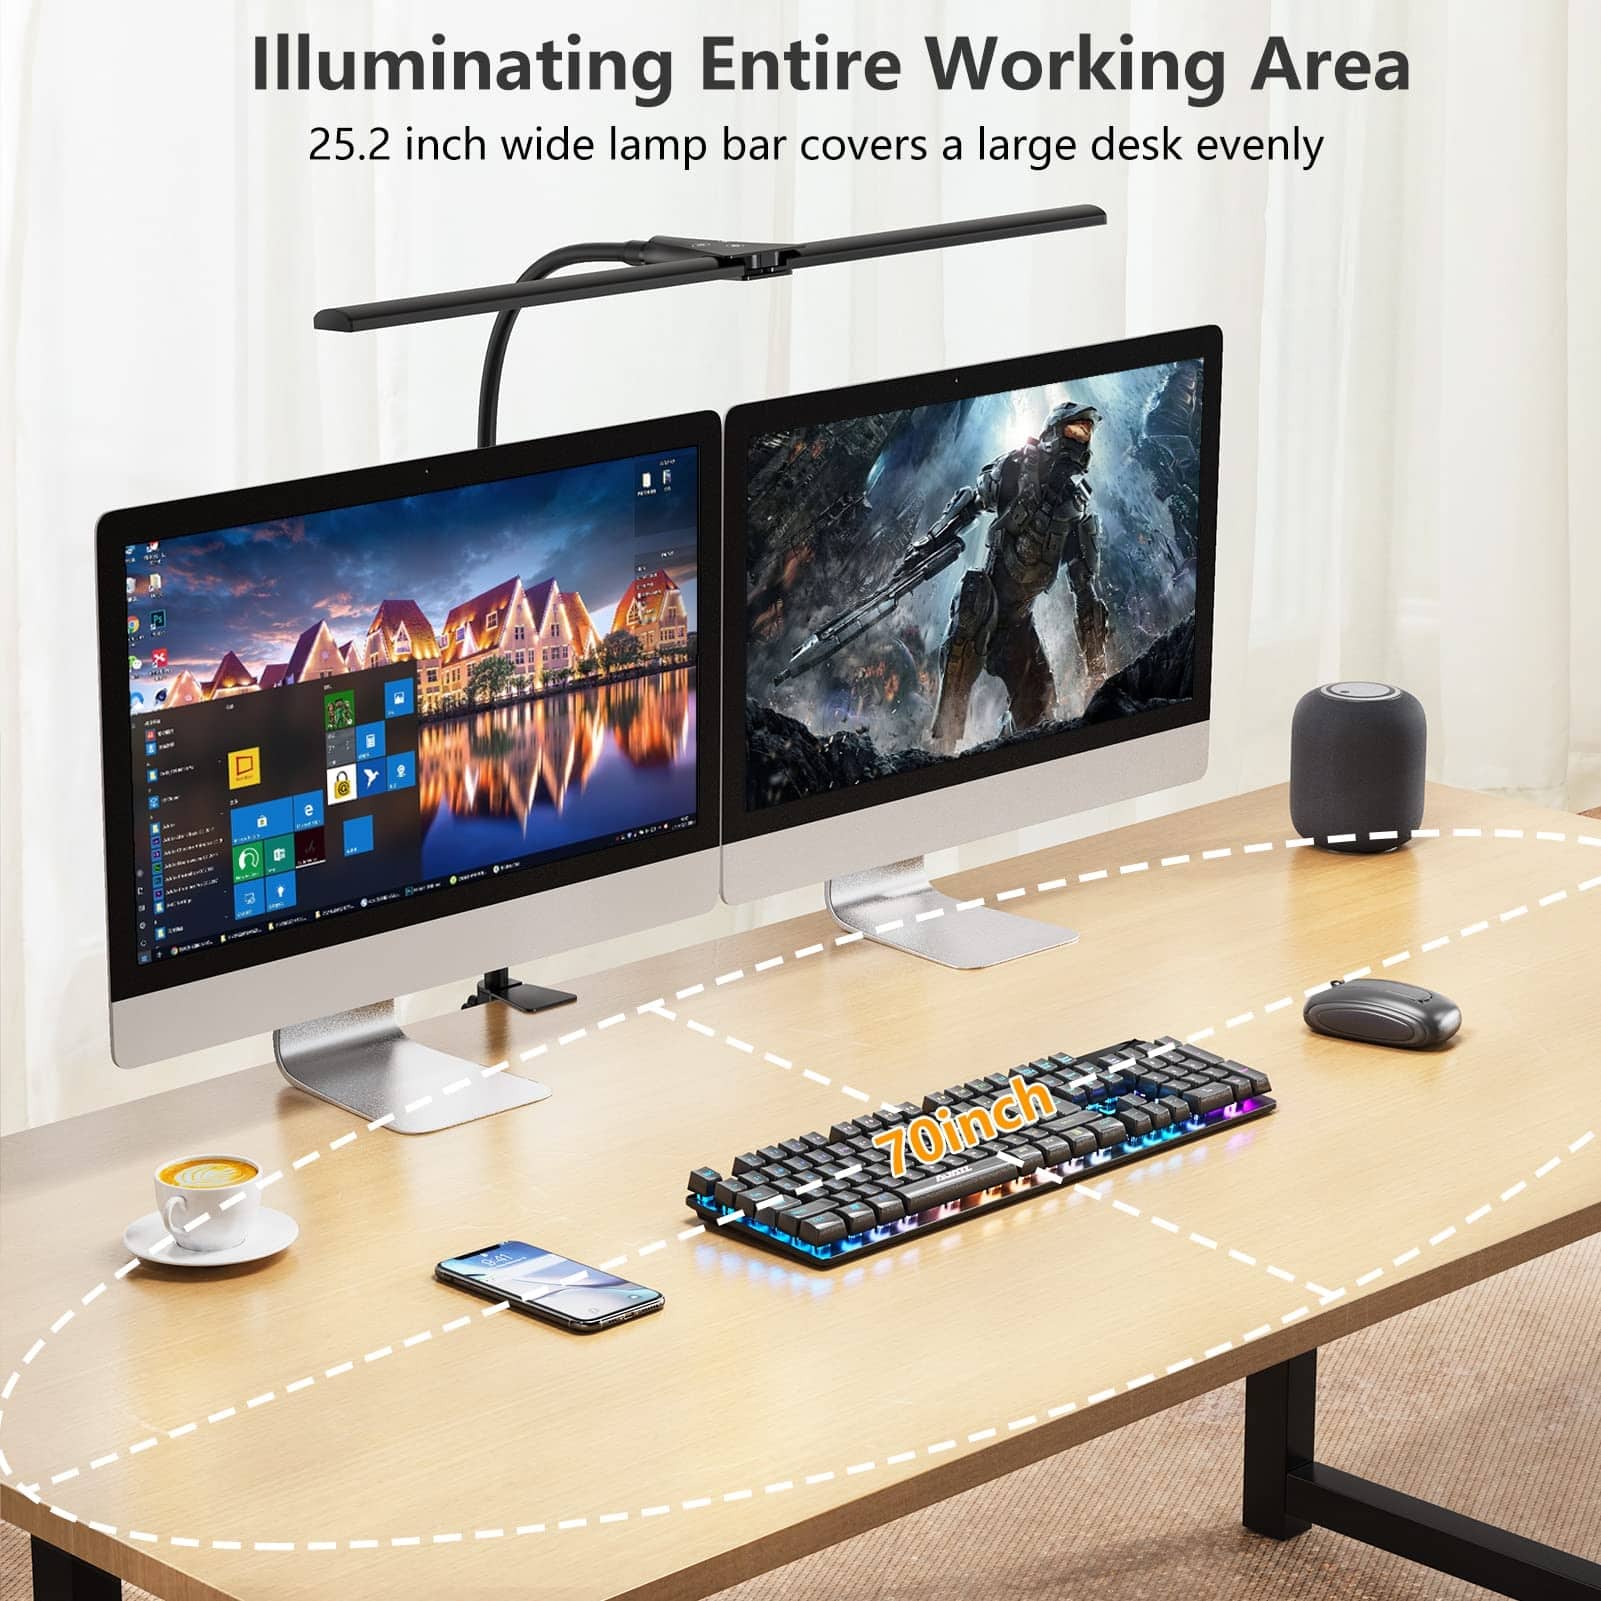 LED Desk lamp,Double Head Architect Desk Lamps for Home Office,Extra ...